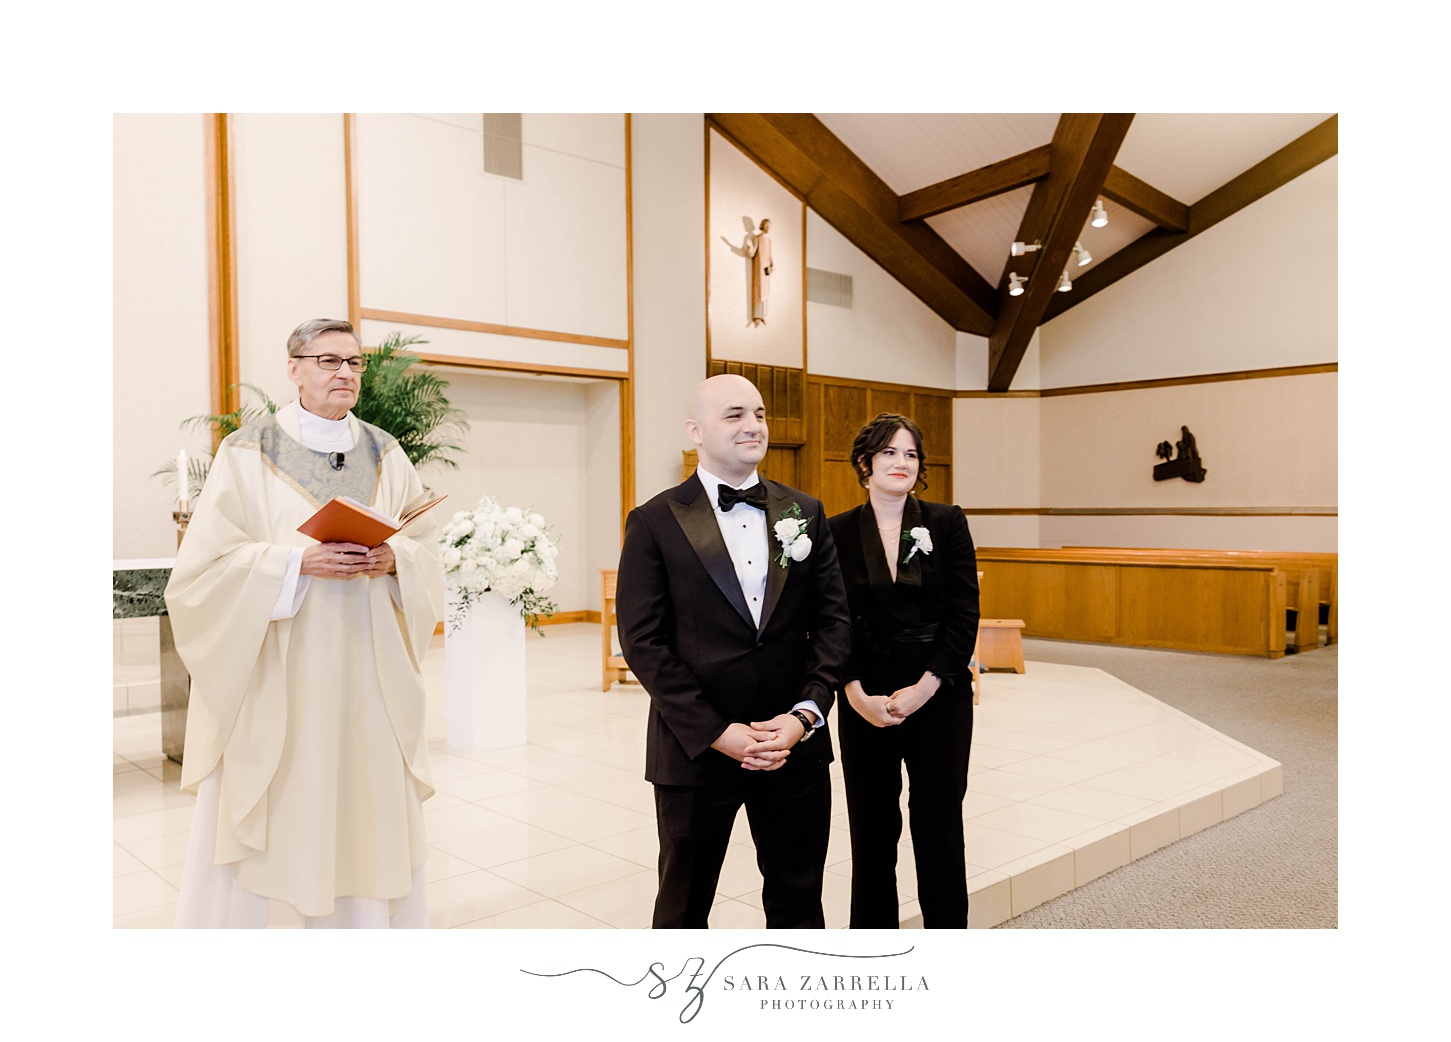 groom waits for bride at alter during wedding ceremony at St. Michael’s Parish in Smithfield